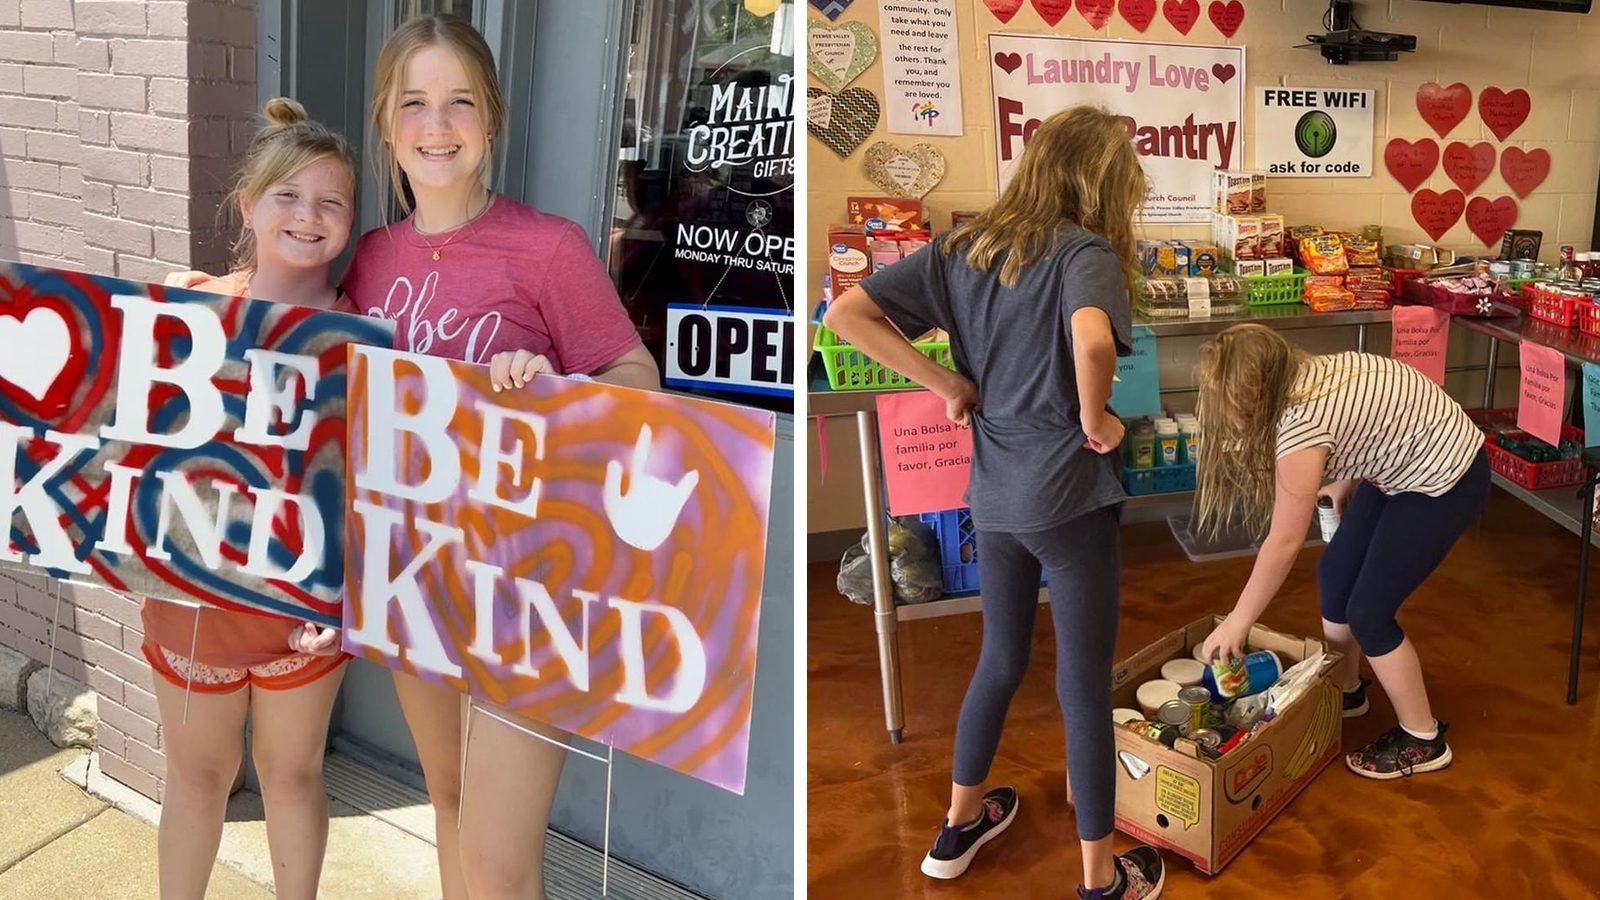 Meet Sisters Who Turned Their Town Into the Kindness Capital of Kentucky